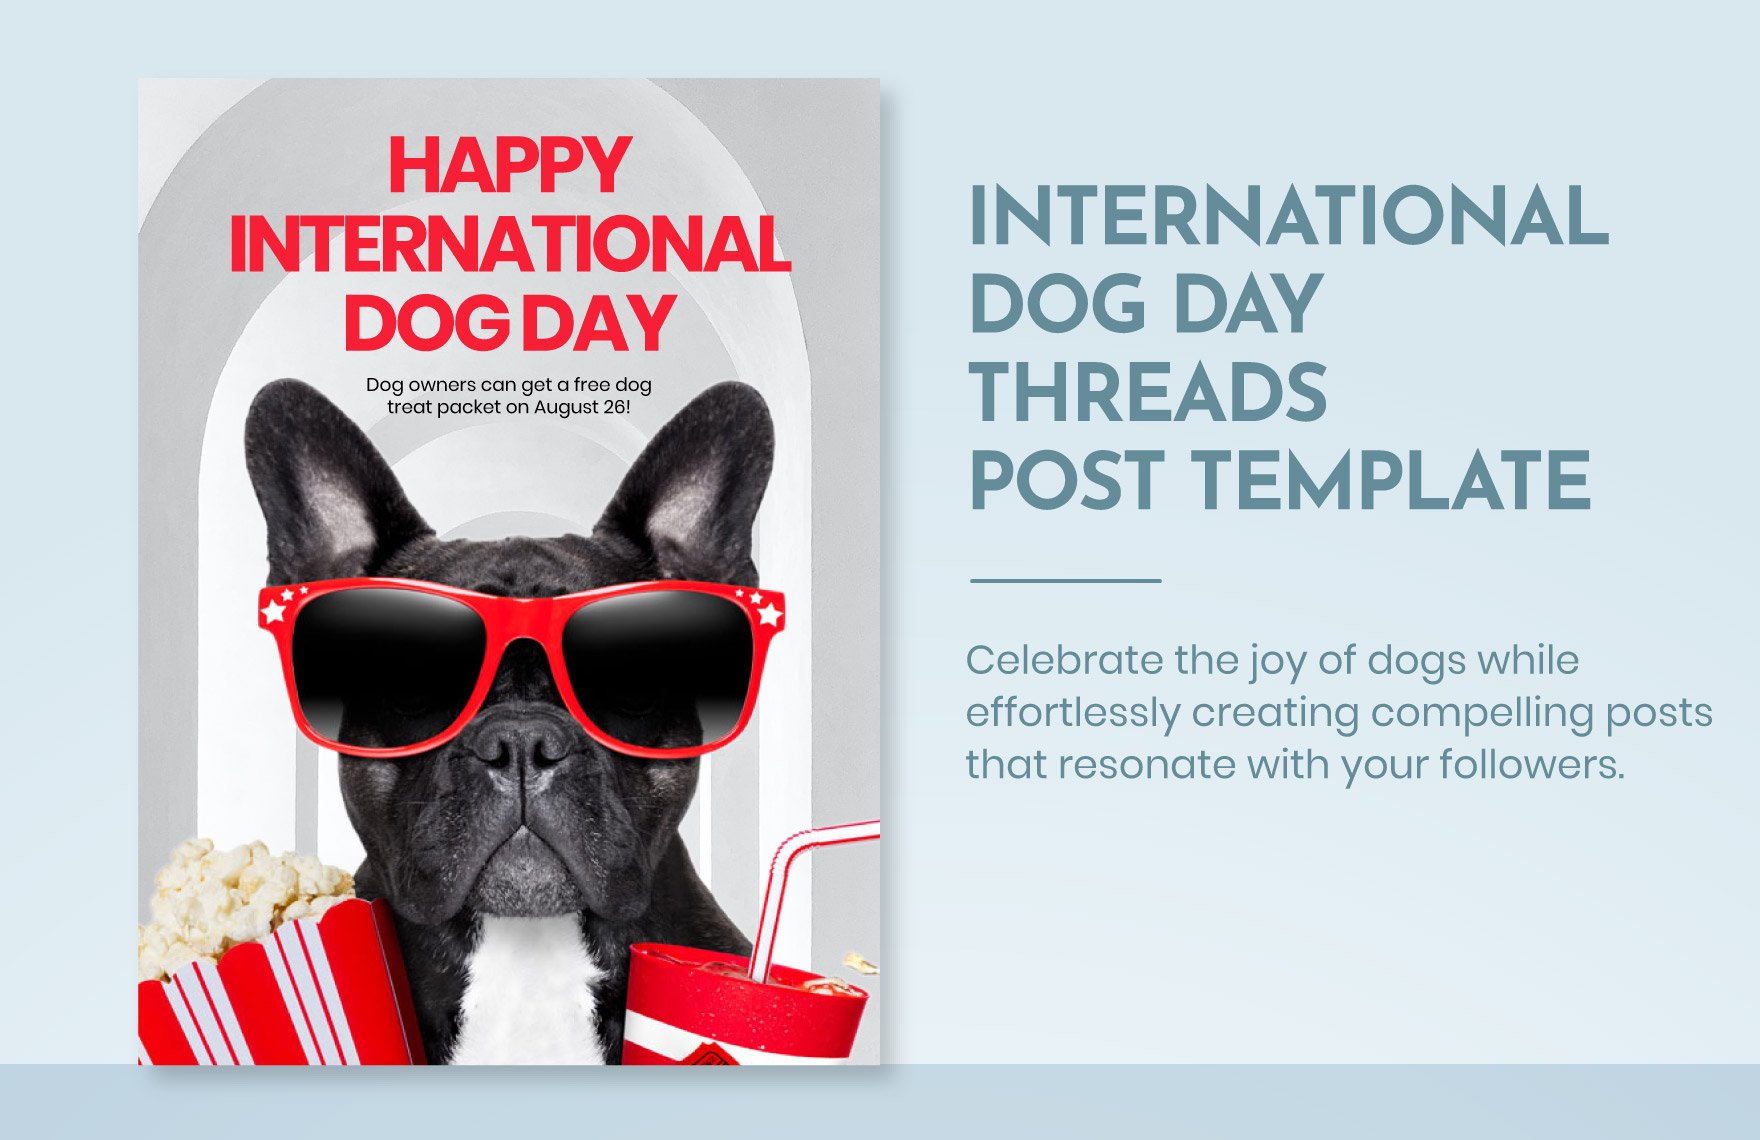 Free International Dog Day  Threads Post Template in Illustrator, PSD, PNG